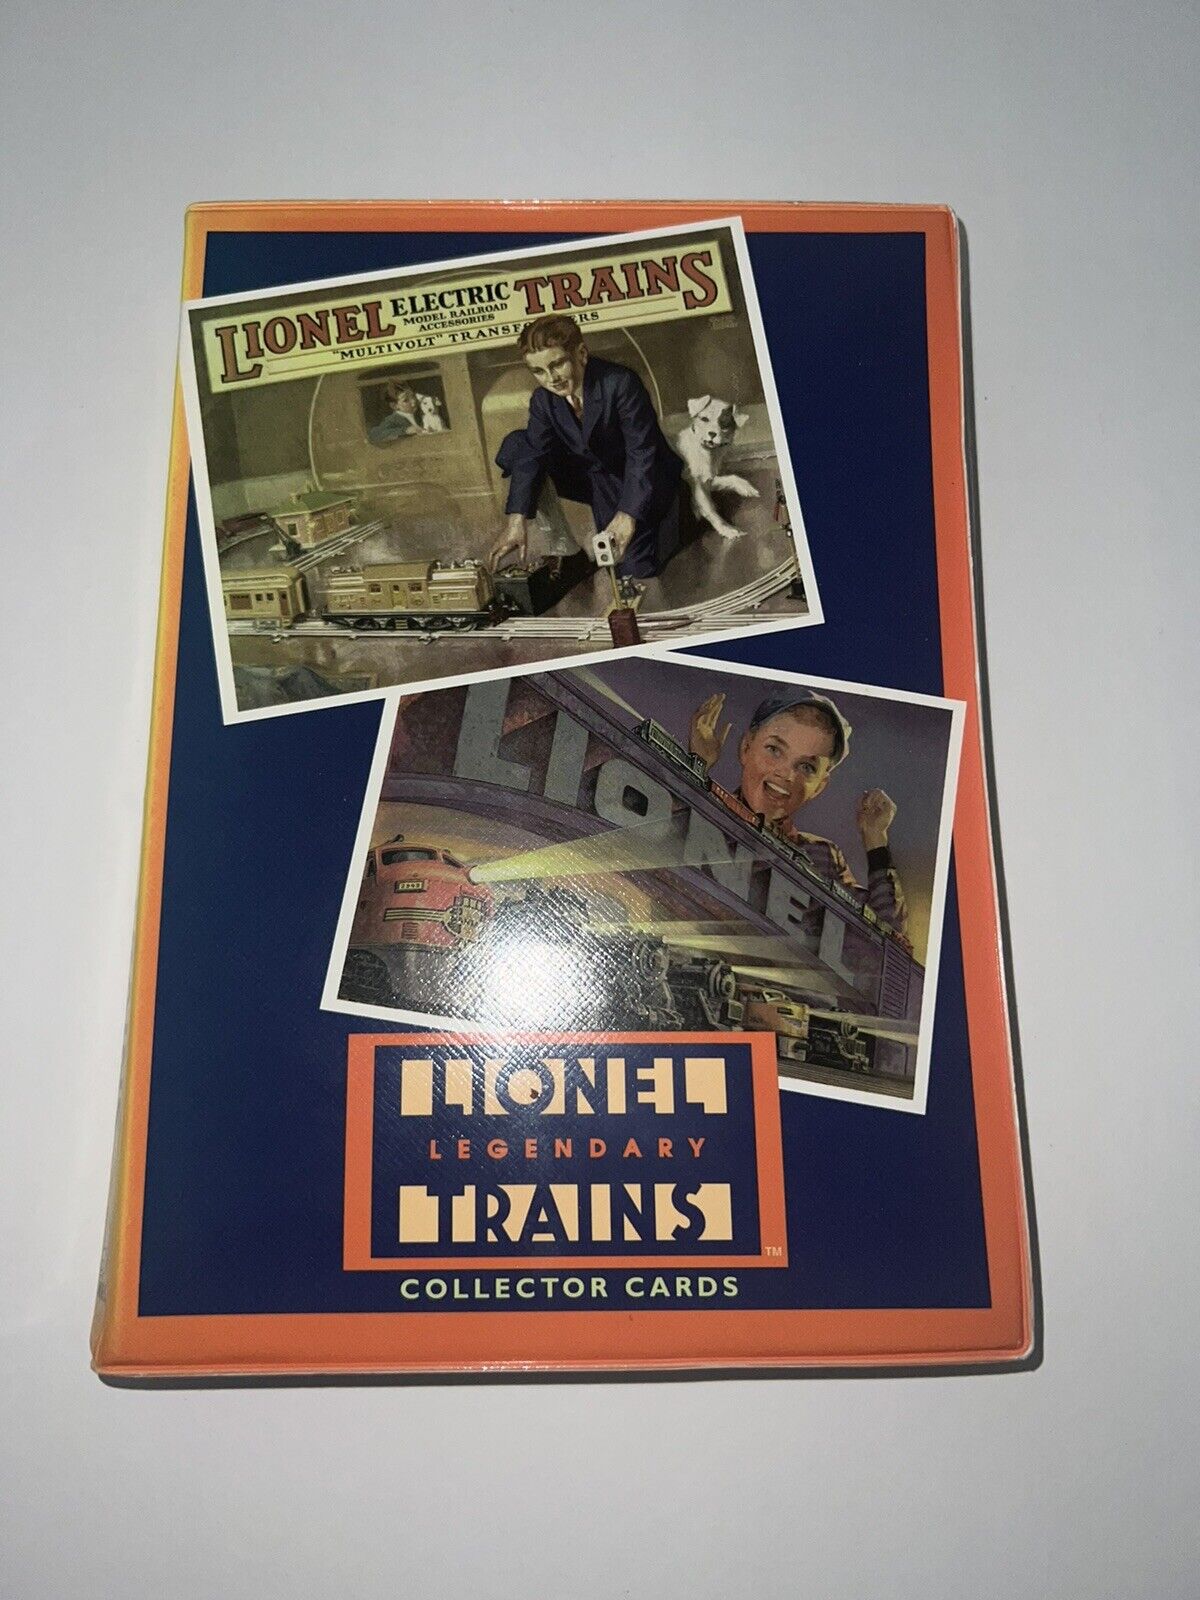 1997 LIONEL LEGENDARY TRAINS COLLECTOR CARDS WITH BINDER ALBUM 74CARDS - MINT